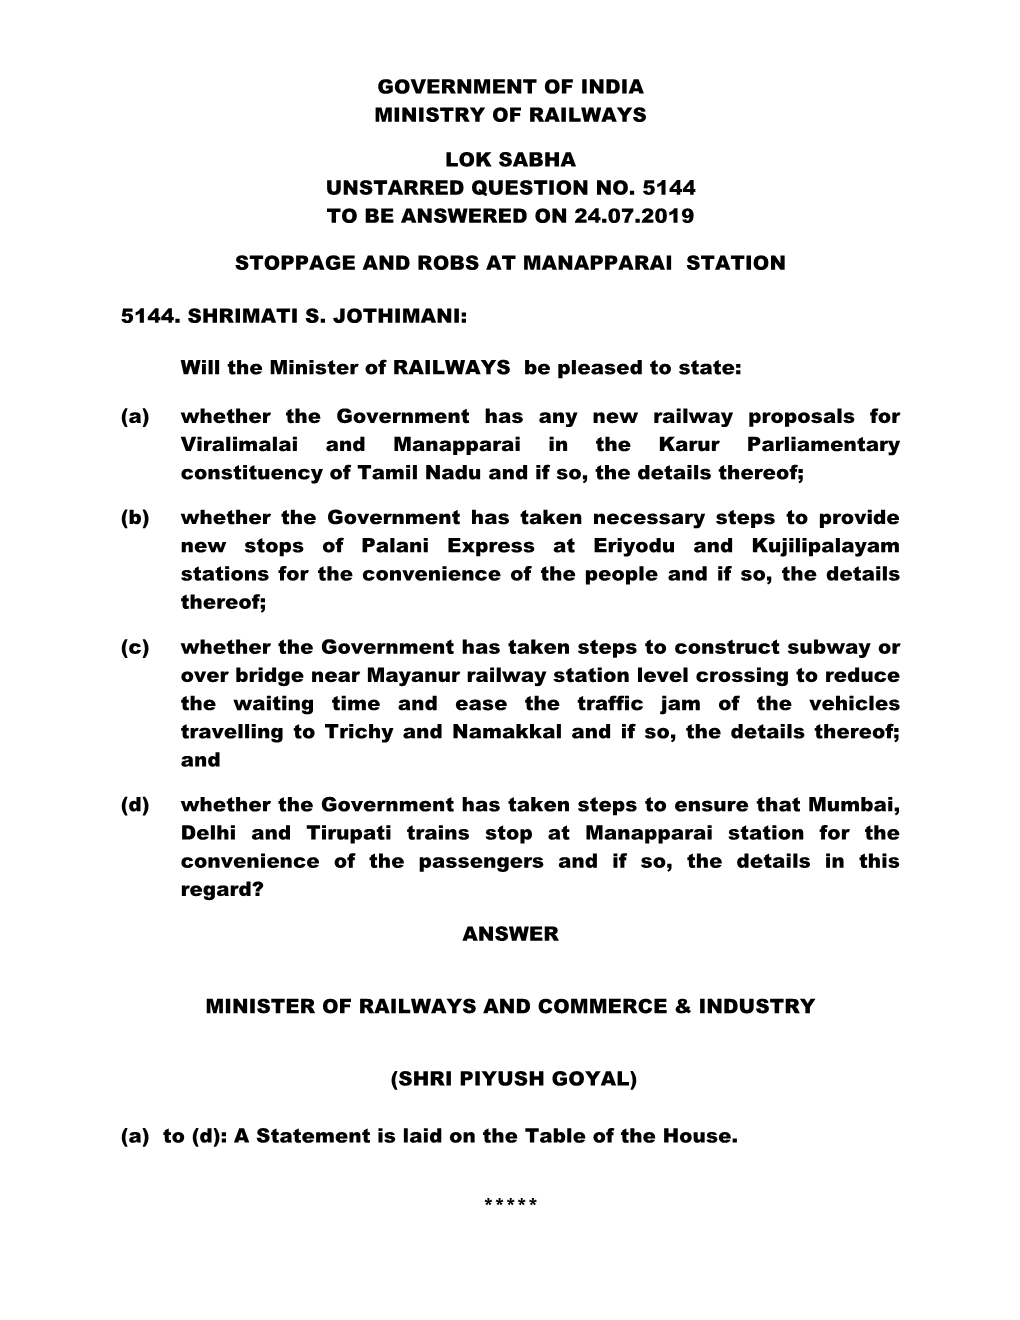 Government of India Ministry of Railways Lok Sabha Unstarred Question No. 5144 to Be Answered on 24.07.2019 Stoppage and Robs At